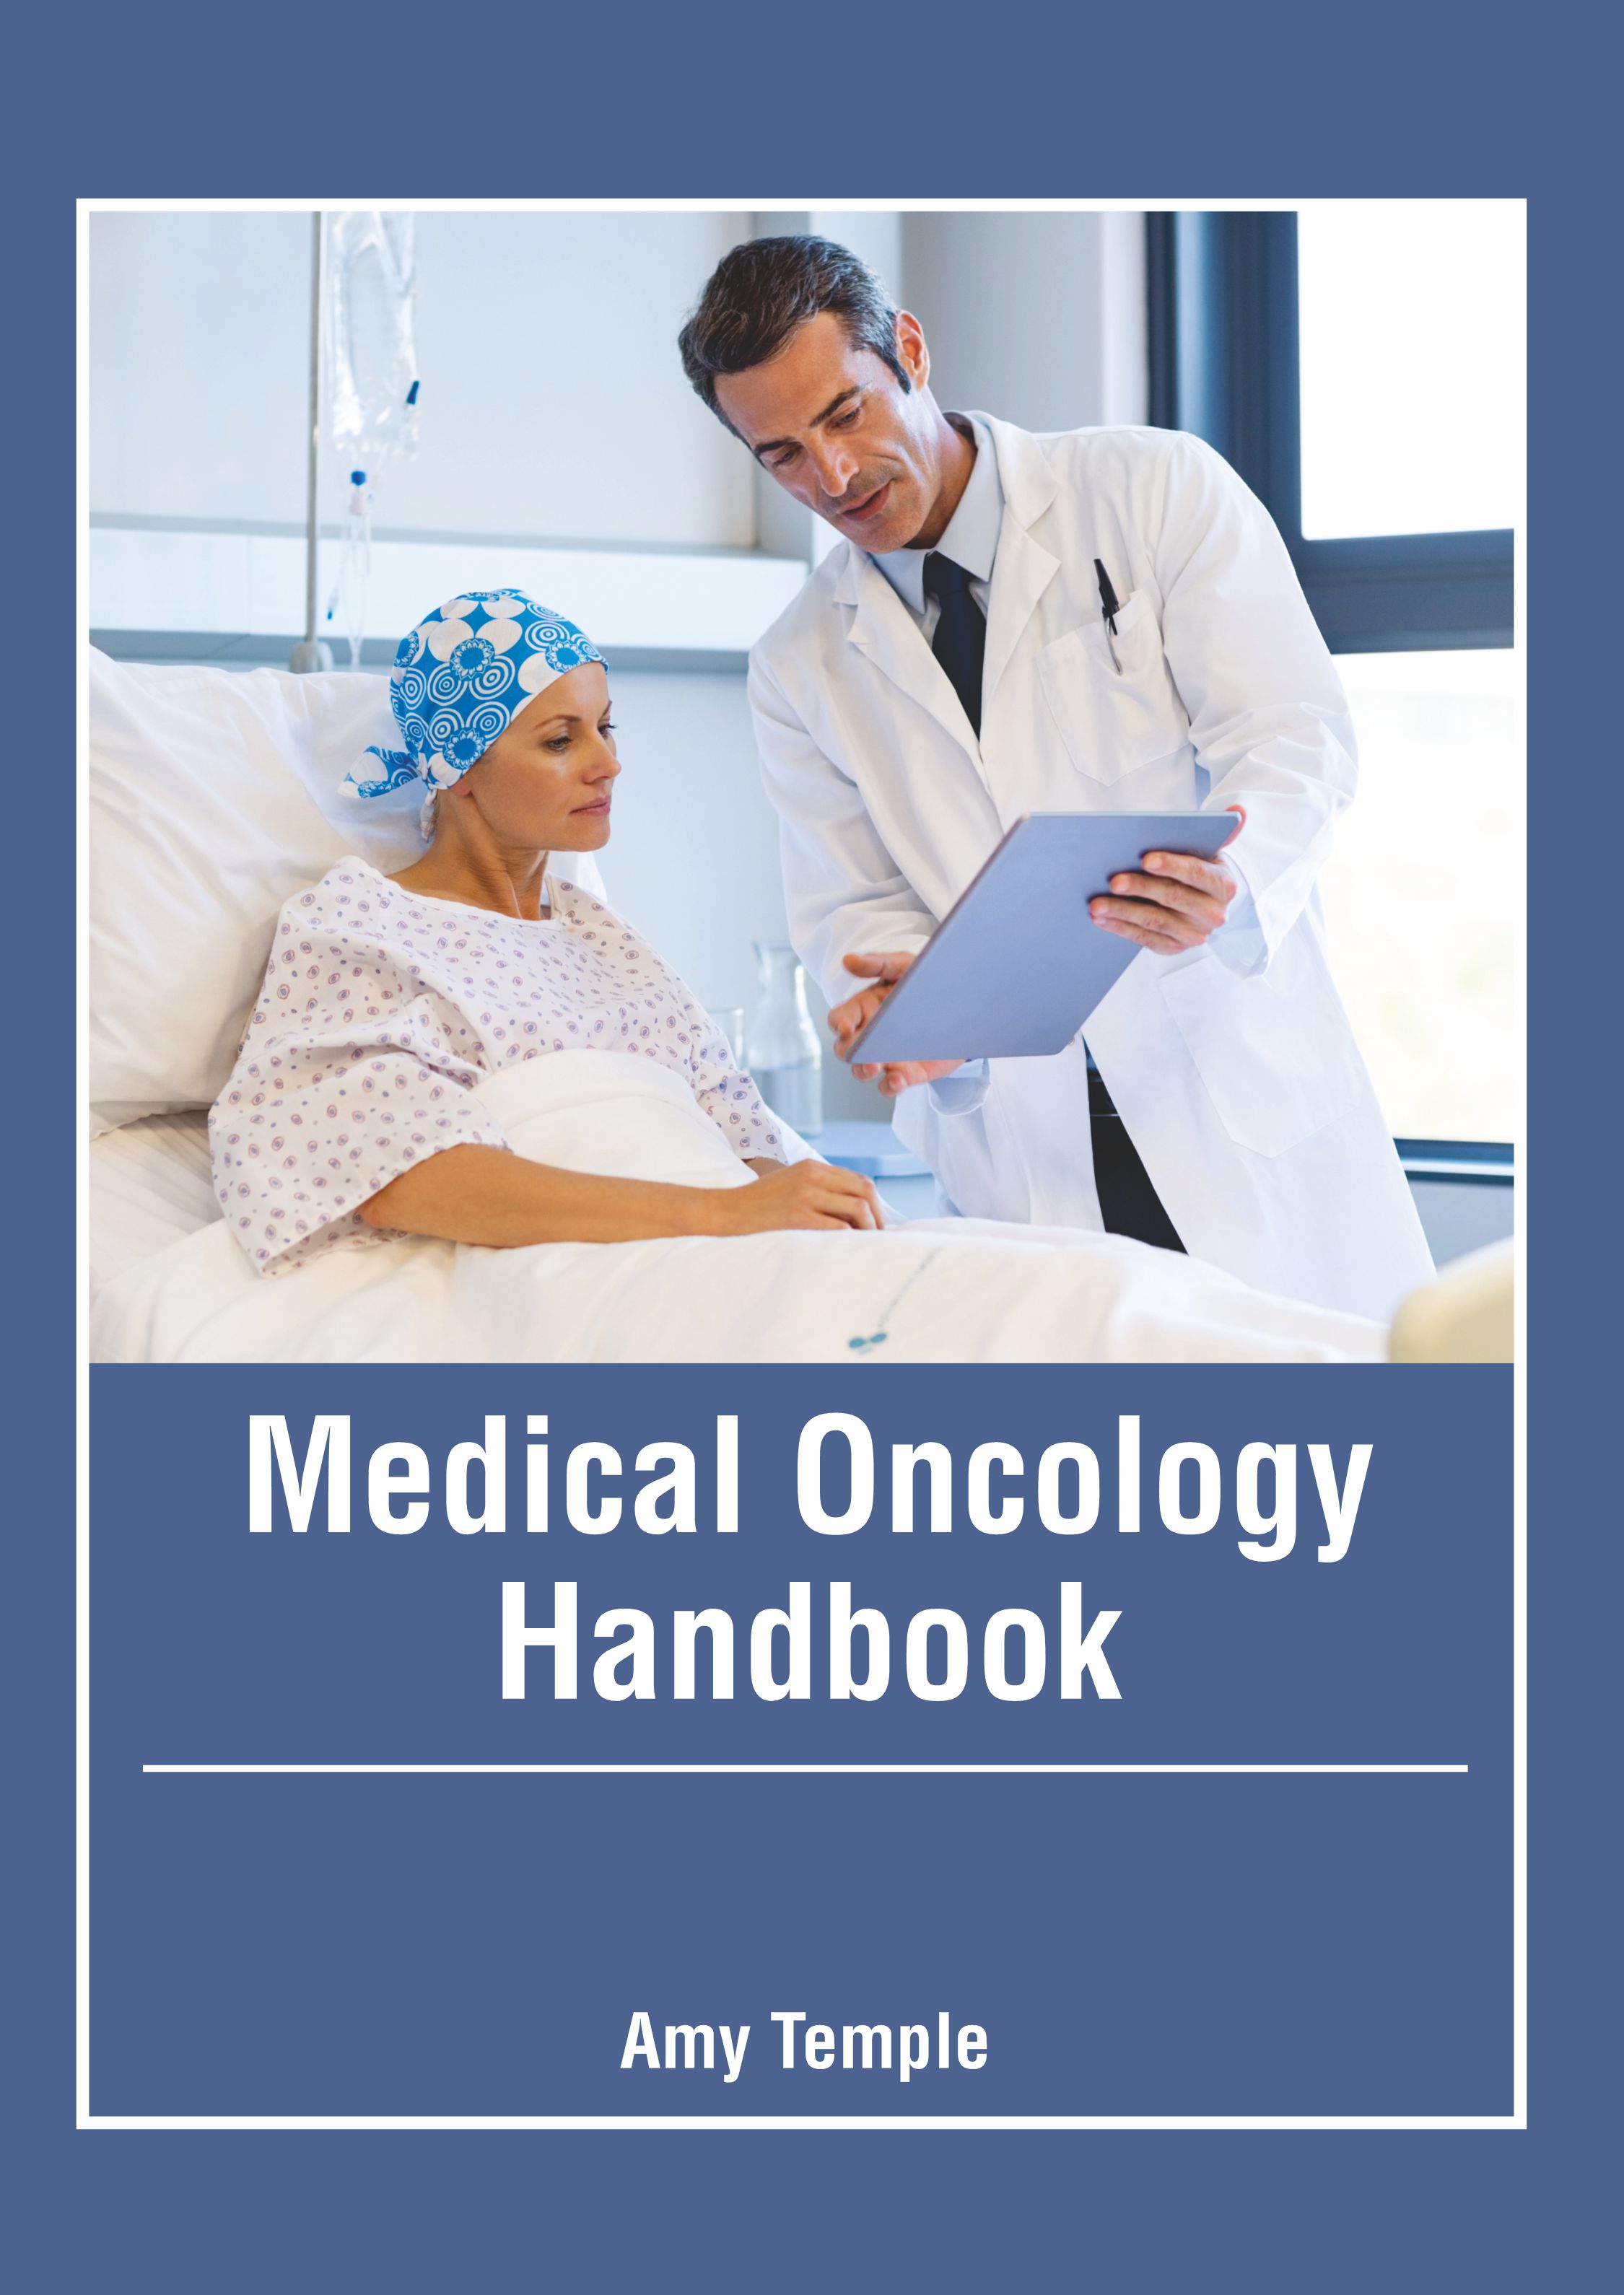 

exclusive-publishers/american-medical-publishers/medical-oncology-handbook-9781639273638